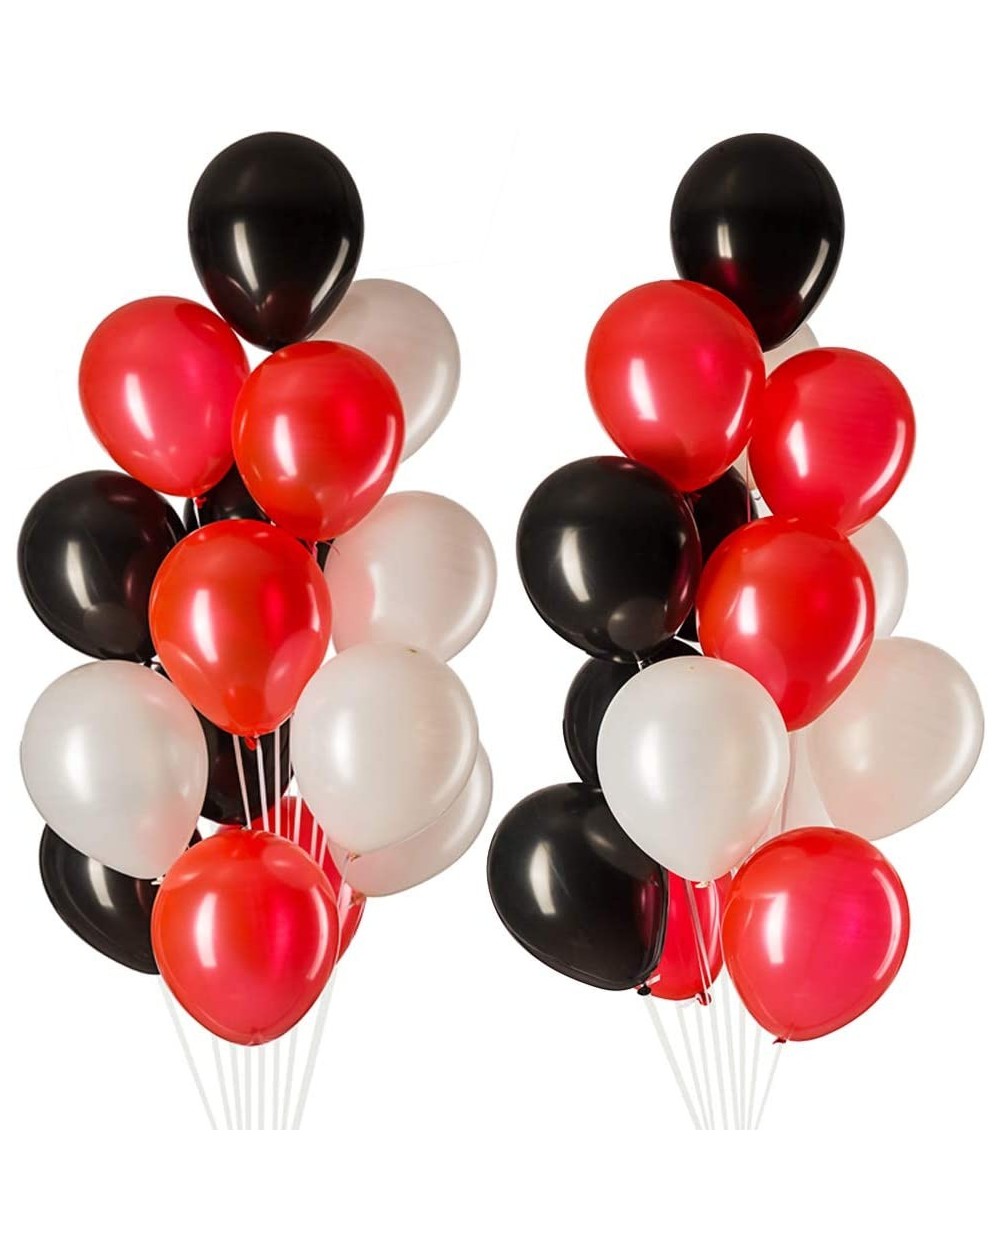 Balloons 12" Red Black White Balloons- Latex Helium Balloons for Party Decorations- 3.2g/pcs- Pack of 100 - 12" Red Black Whi...